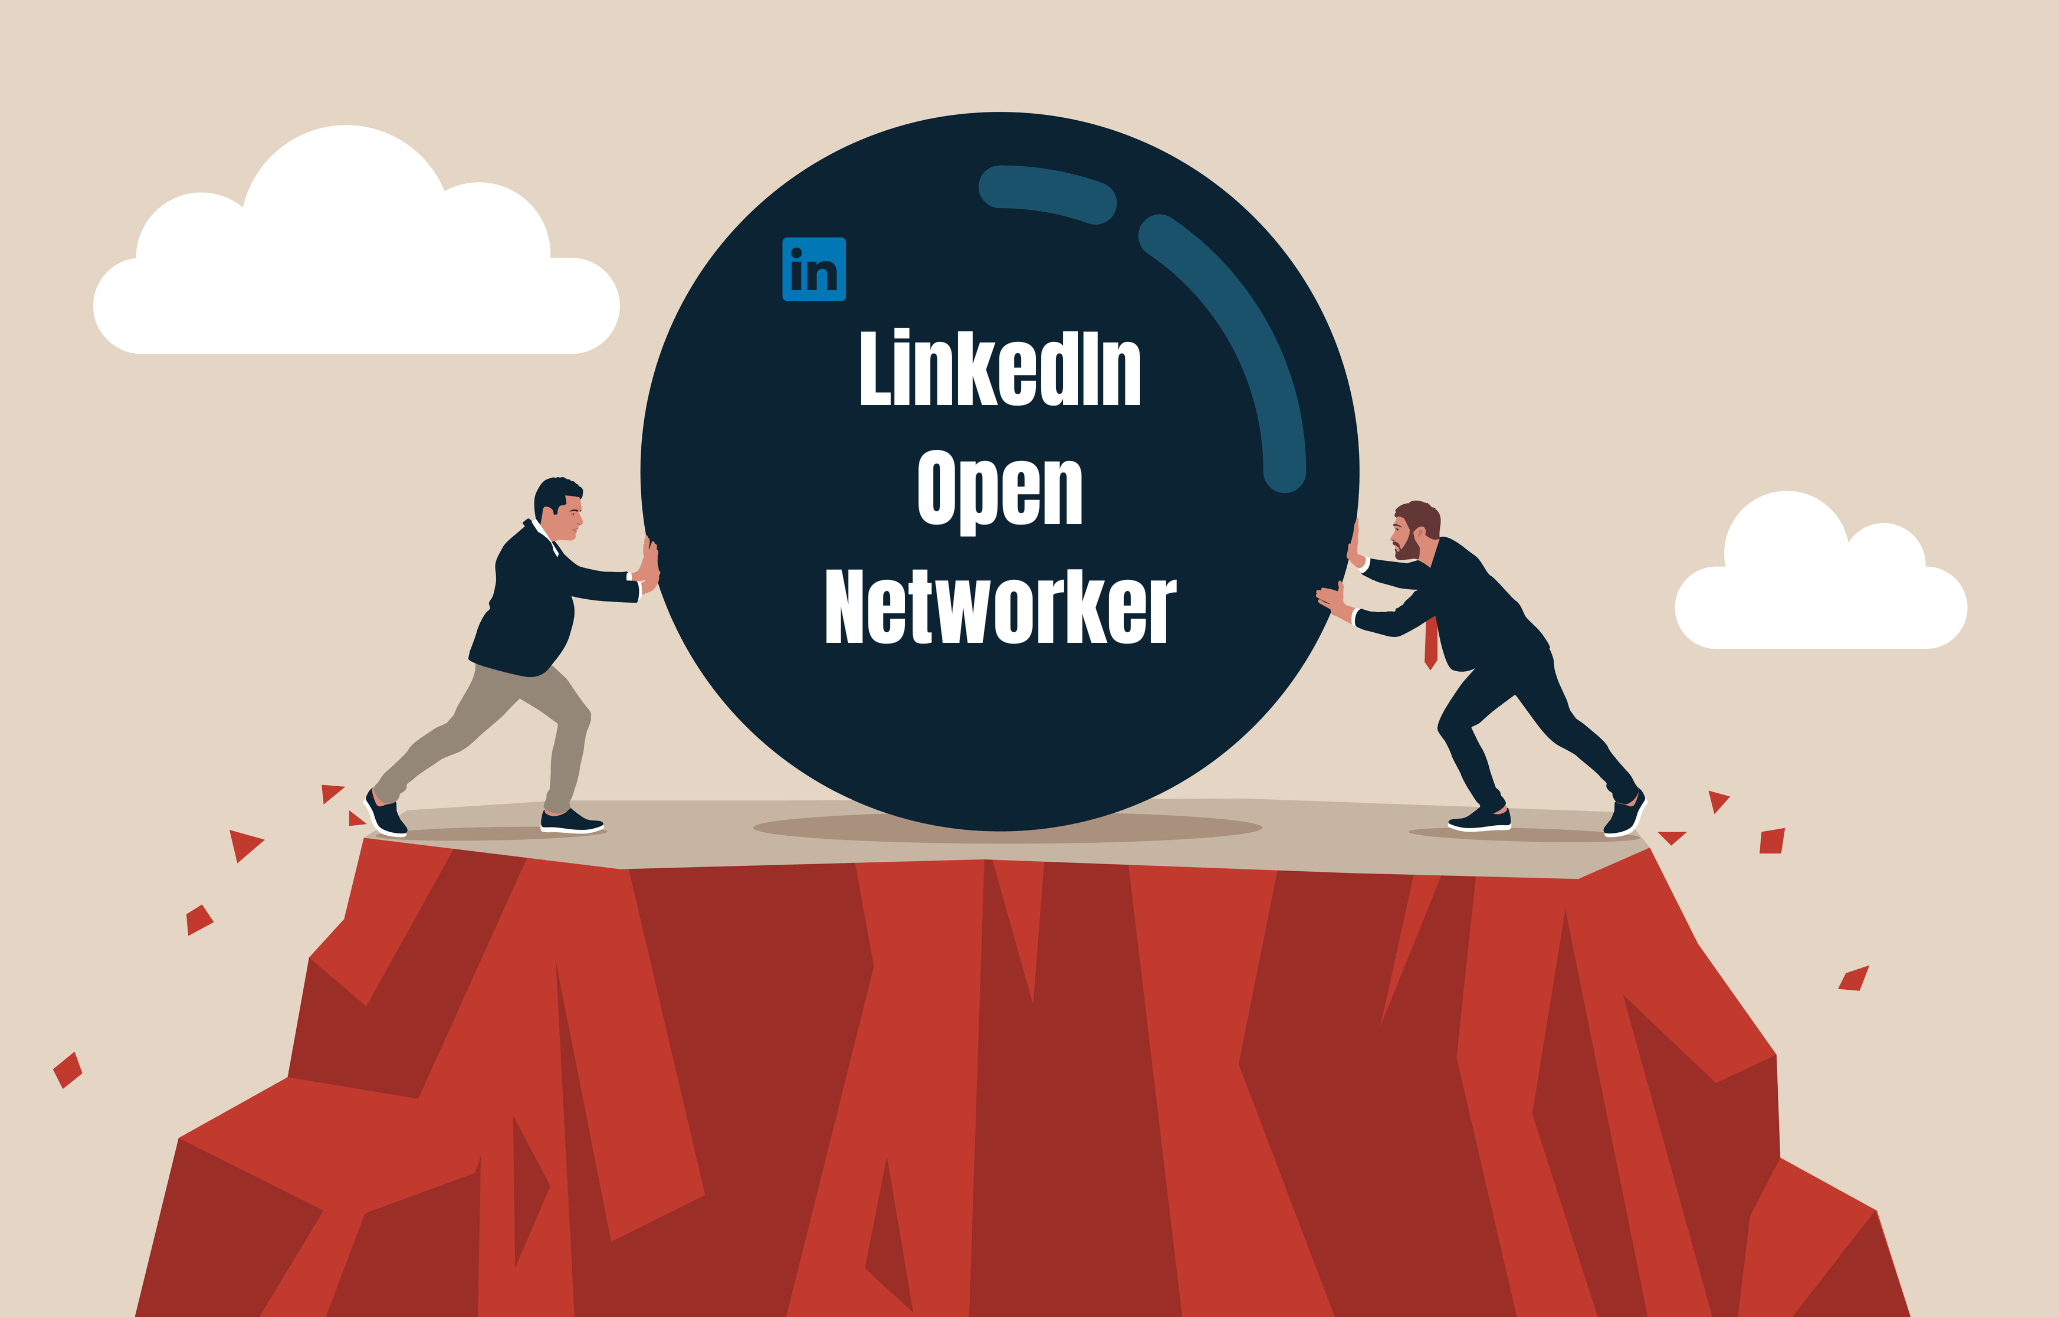 LinkedIn-Open-Networker-pros-and-cons